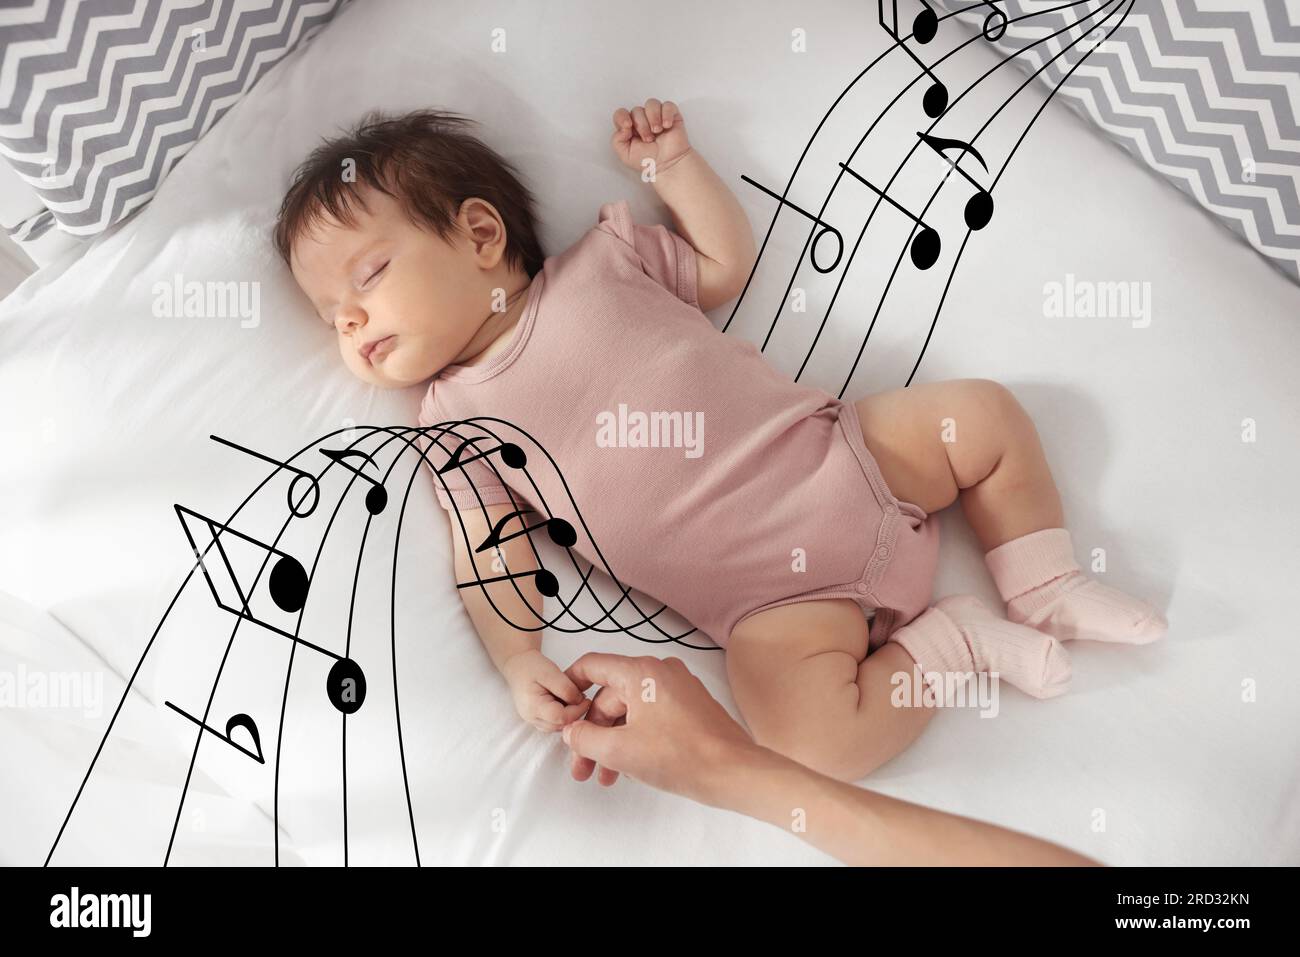 Lullaby songs. Mother holding her sleeping baby's hand on bed, top view. Illustration of flying music notes around child Stock Photo